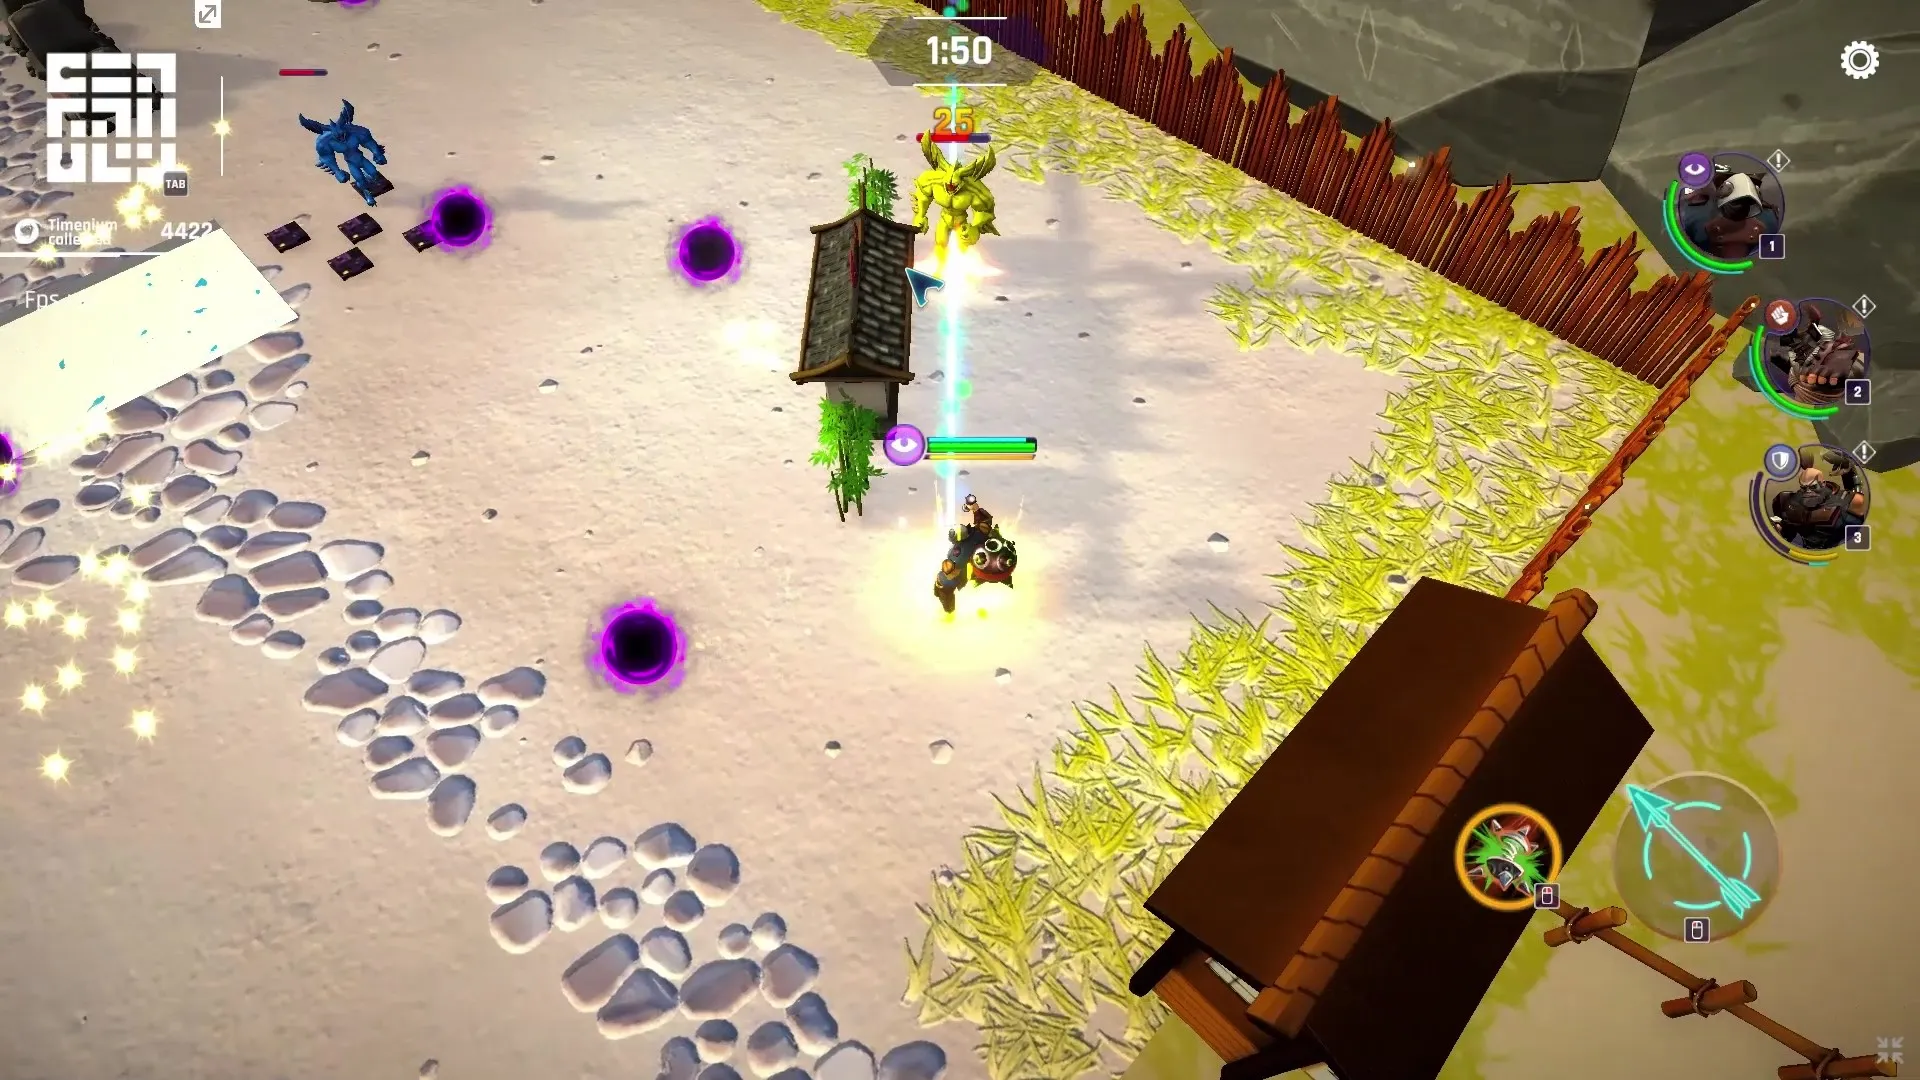 The player's character, a Time Runner, battles a boss in Time Breachers. It shows the remaining time in the fight and the characters' HP levels on the screen.